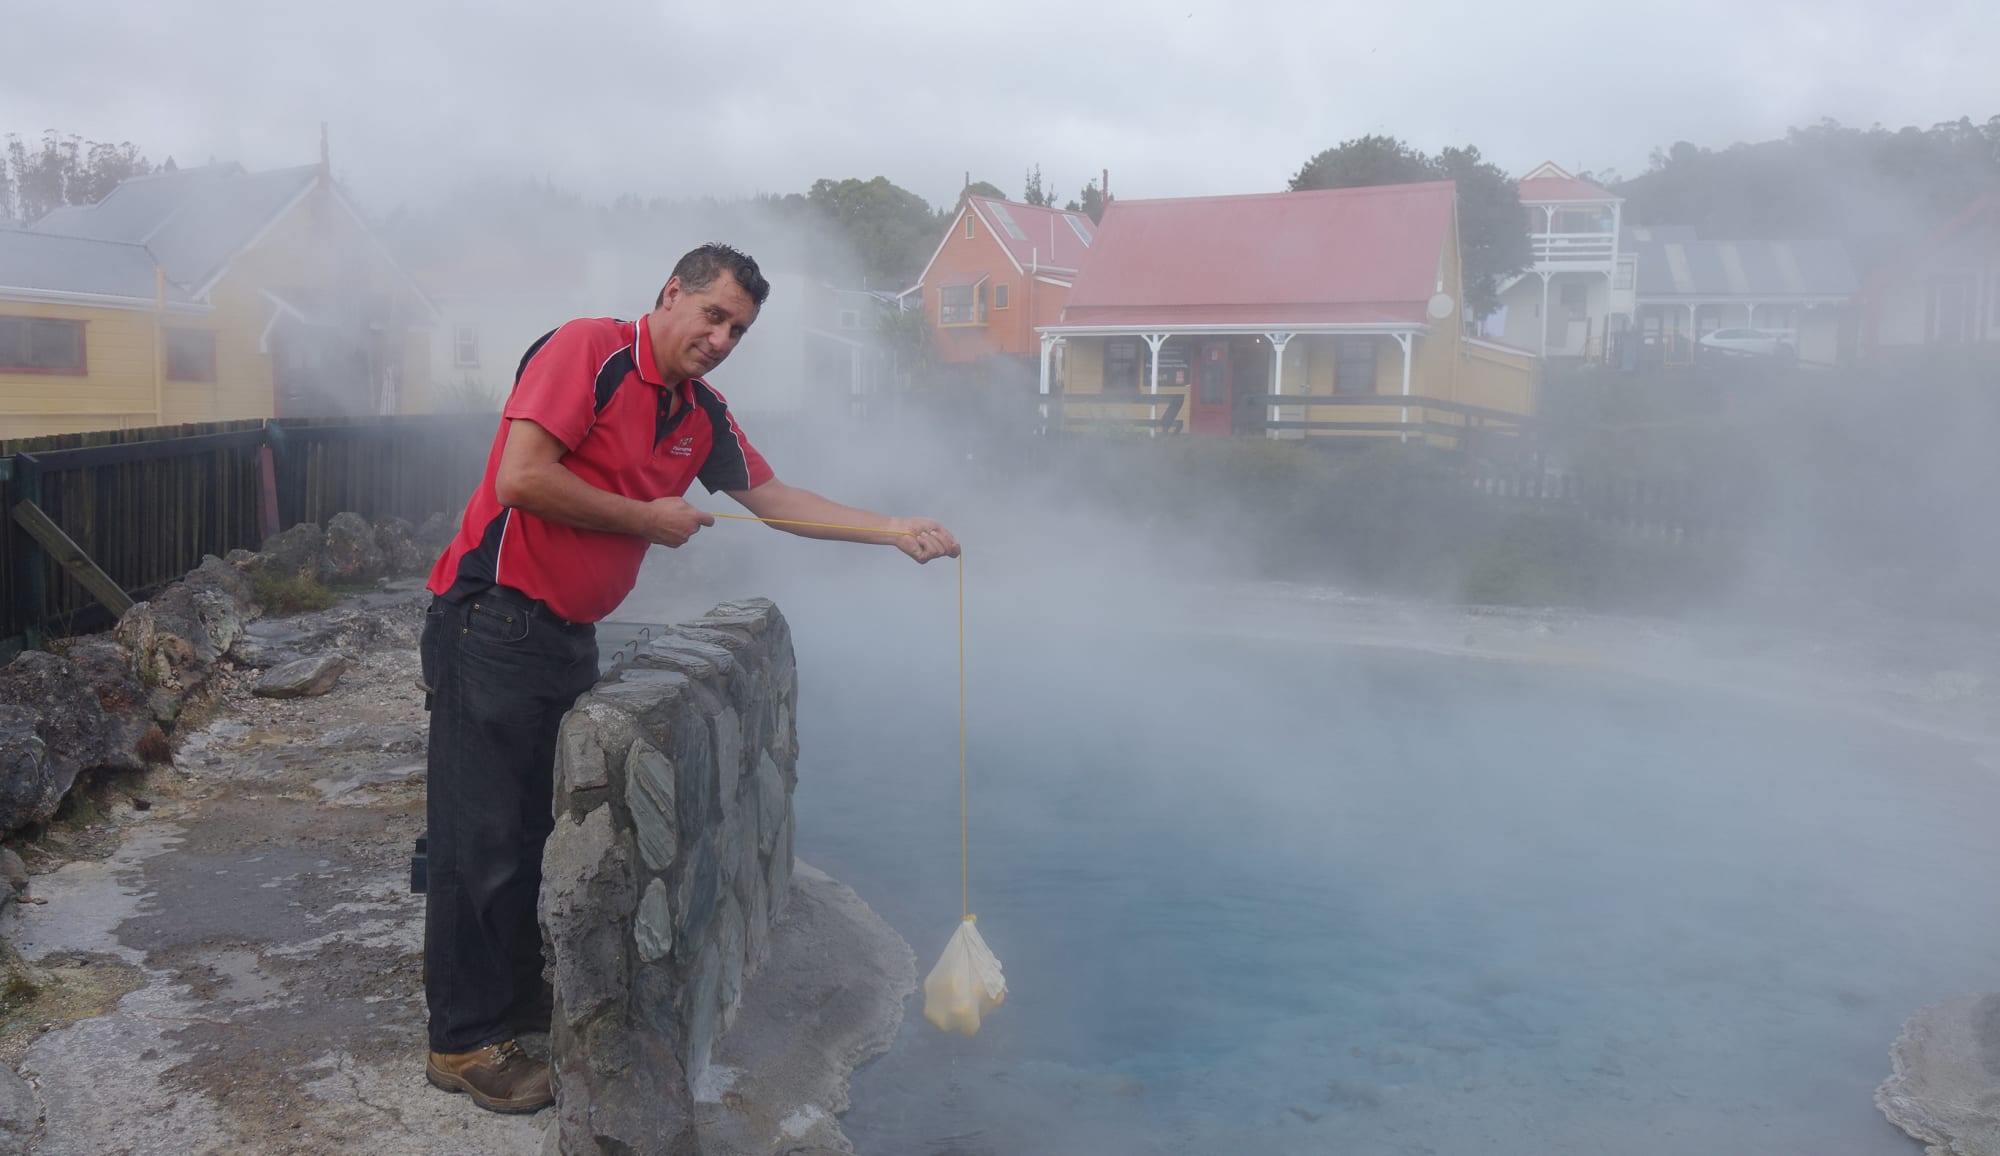 James Warbrick says the number of visitors to Whakarewarewa thermal village needs to be limited to protect the fragile environment.